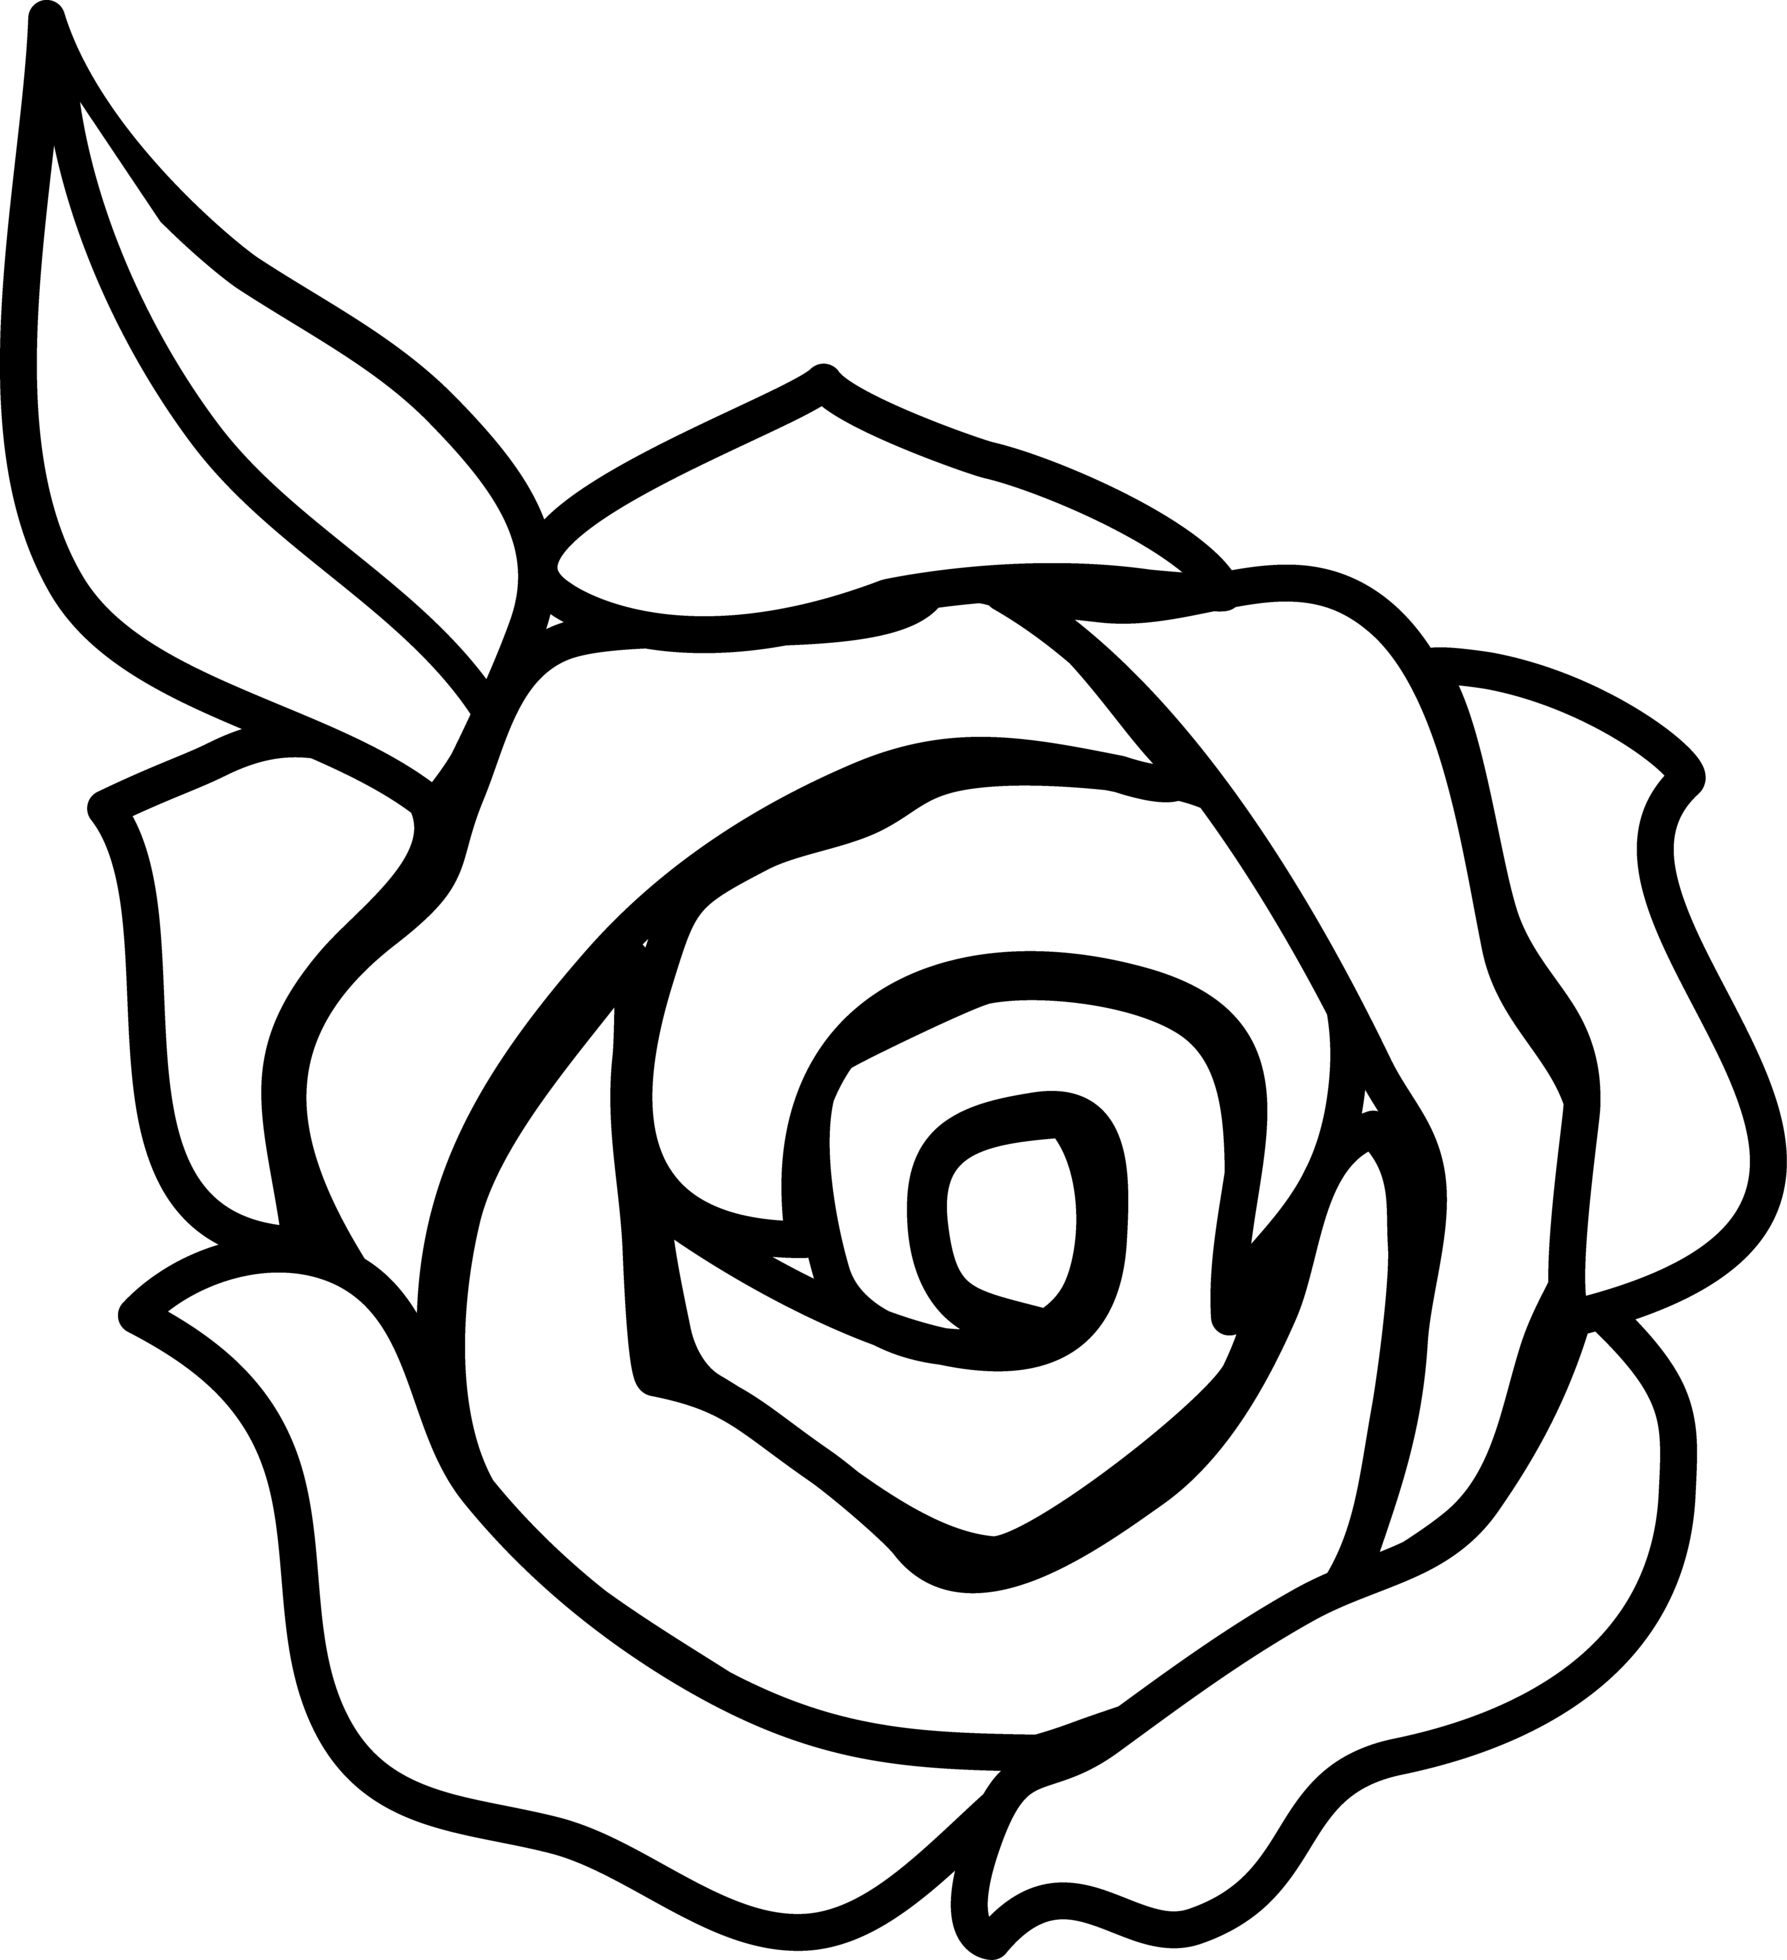 Easy How to Draw a Rose Tutorial Video and Rose Coloring Page